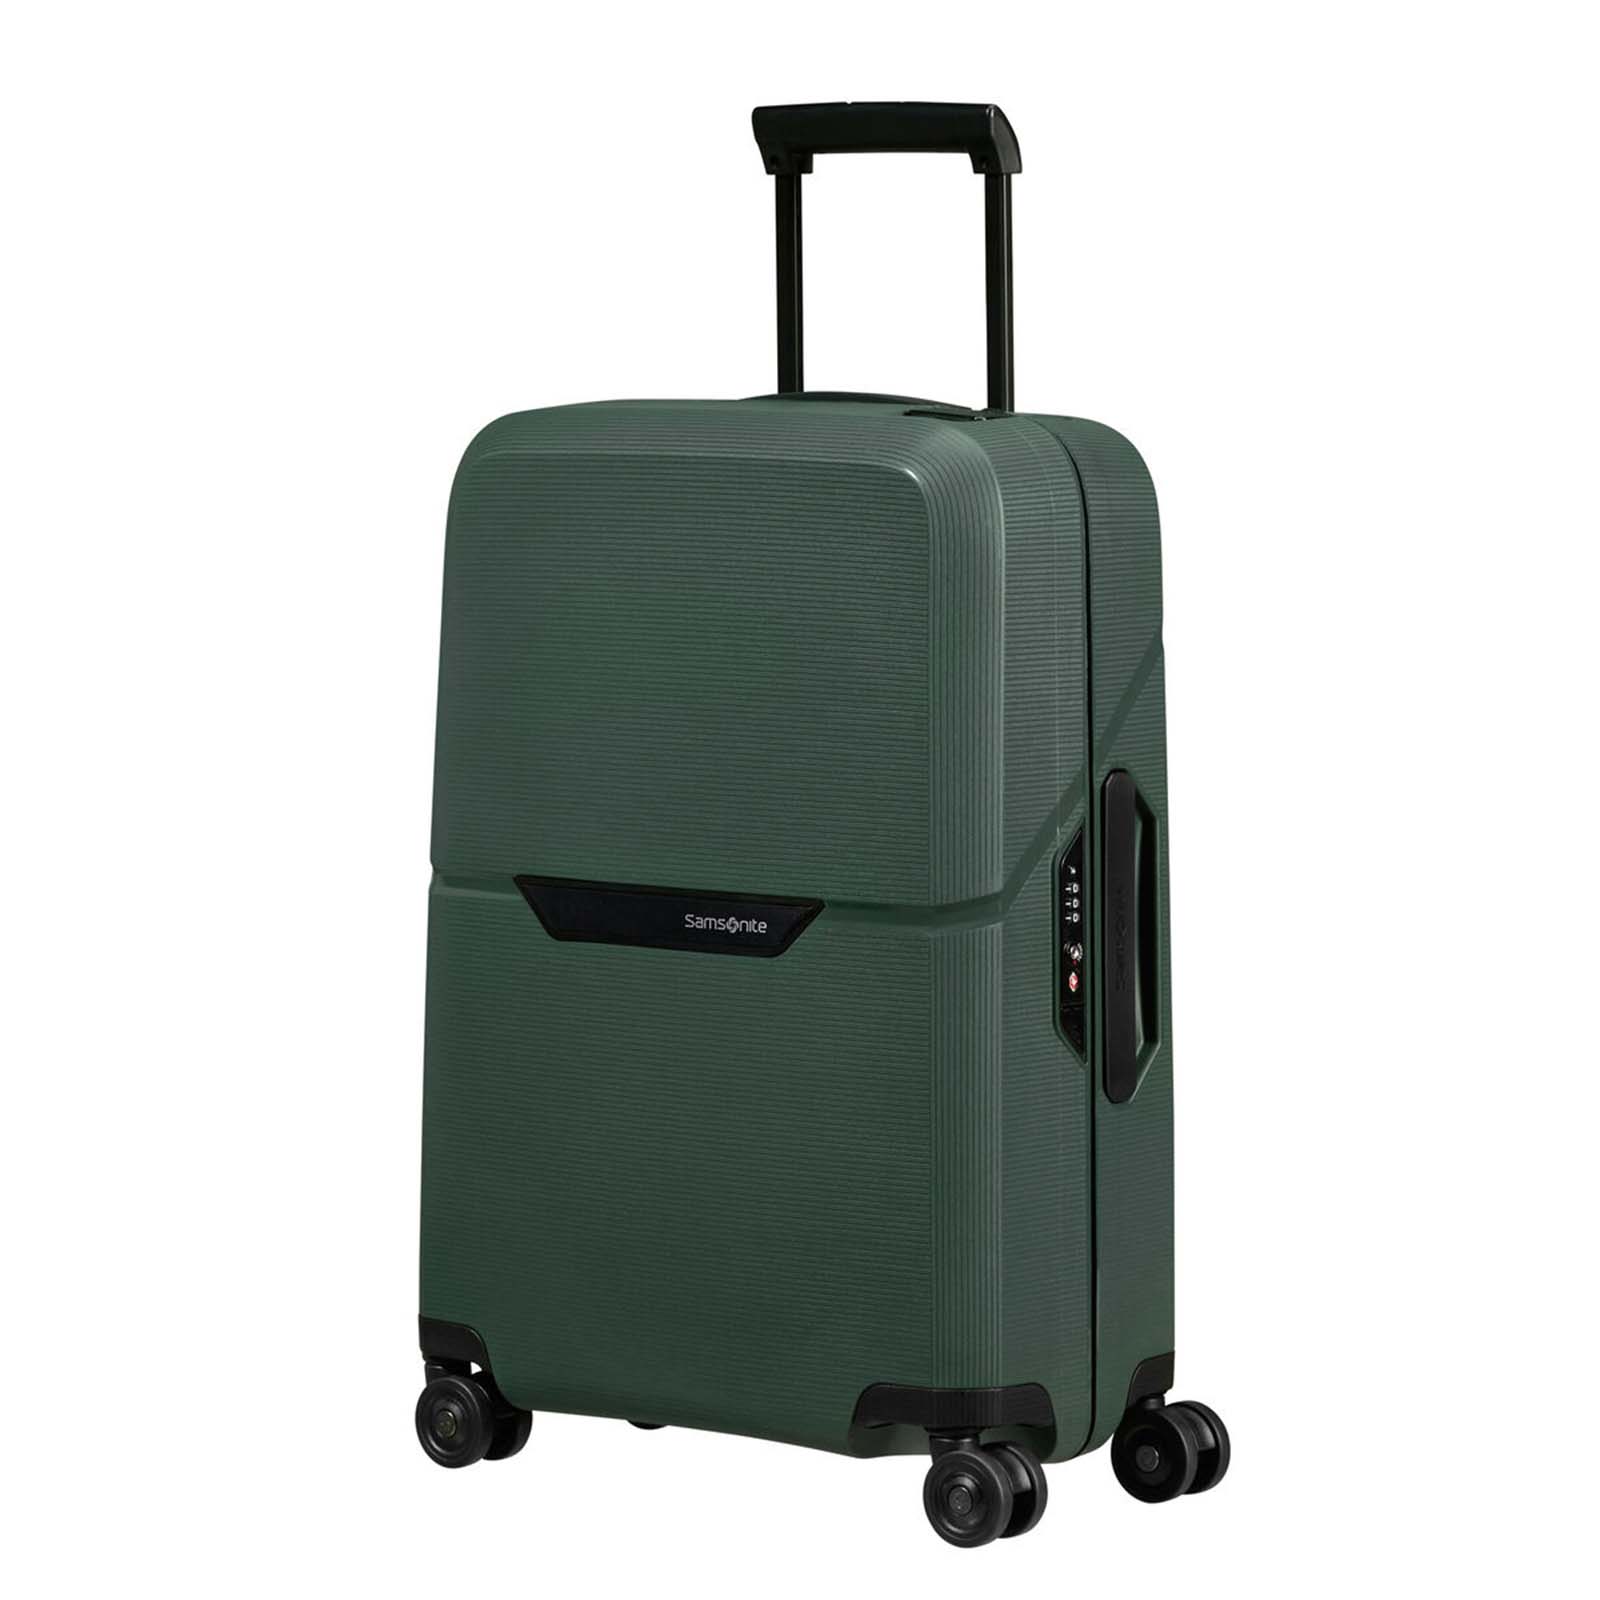 Samsonite-Magnum-Eco-55cm-Carry-On-Suitcase-Forest-Green-Front-Angle